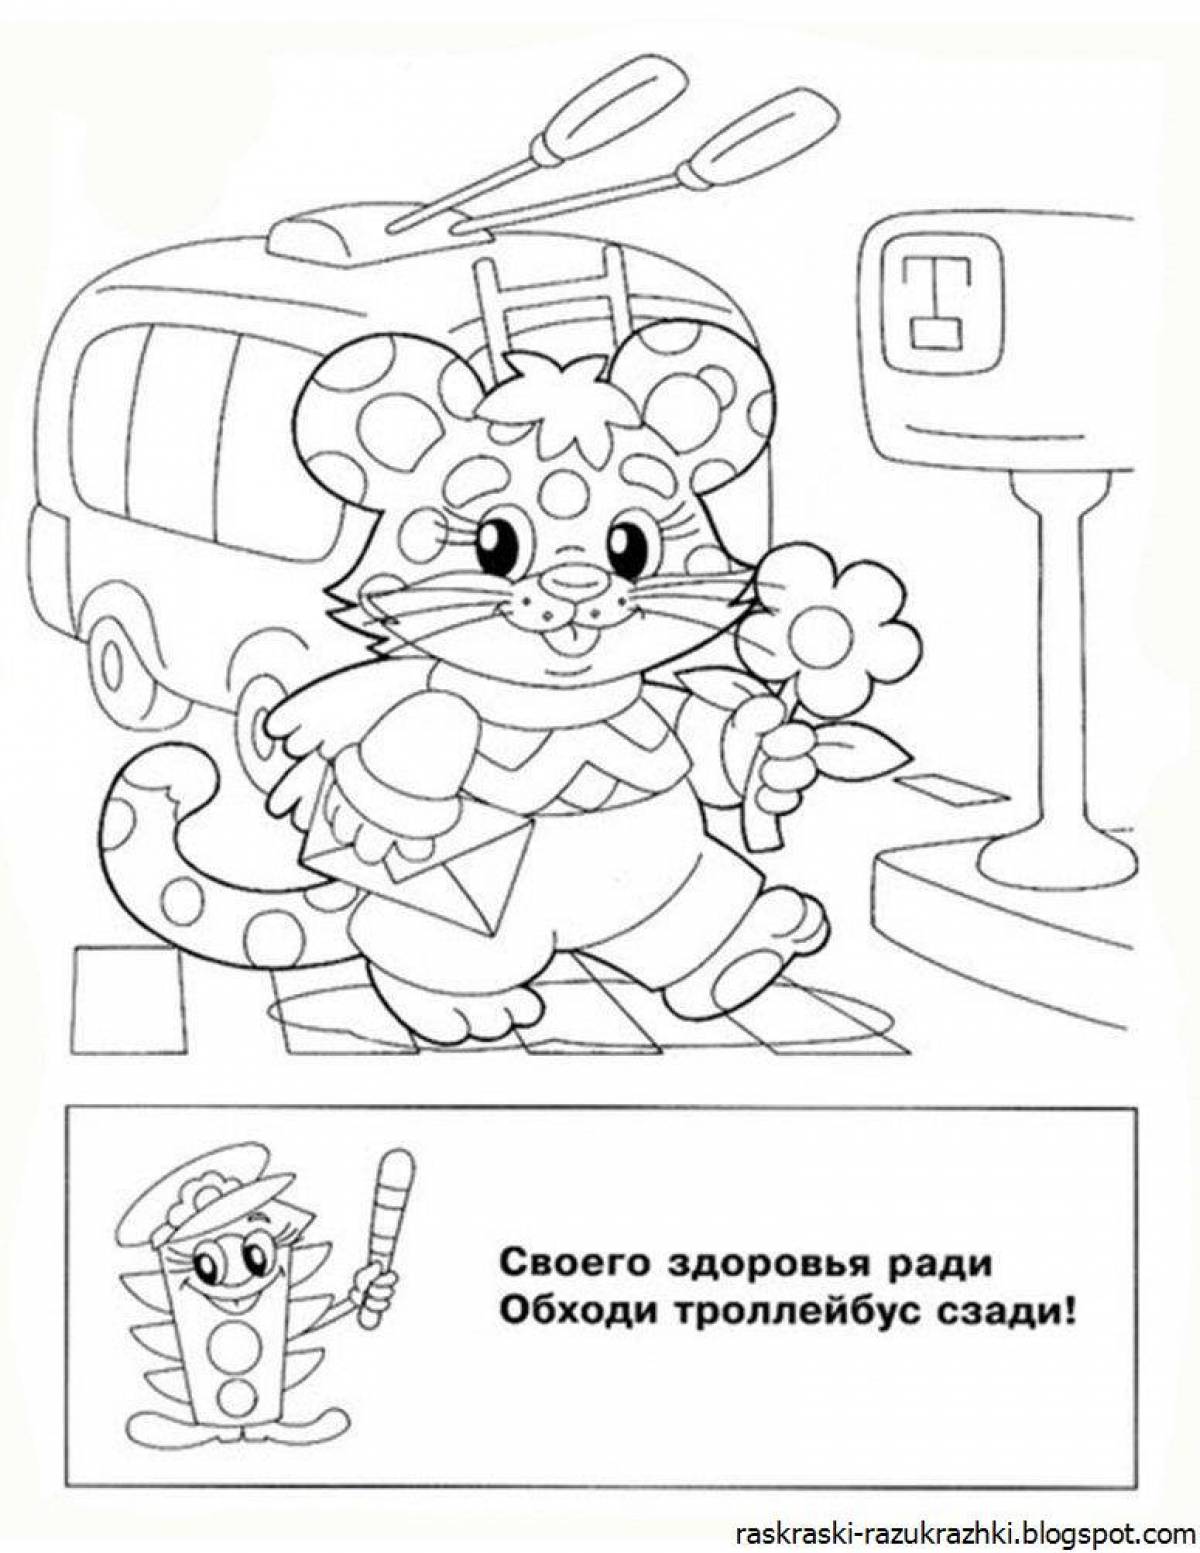 Involving rules of the road coloring pages for kids